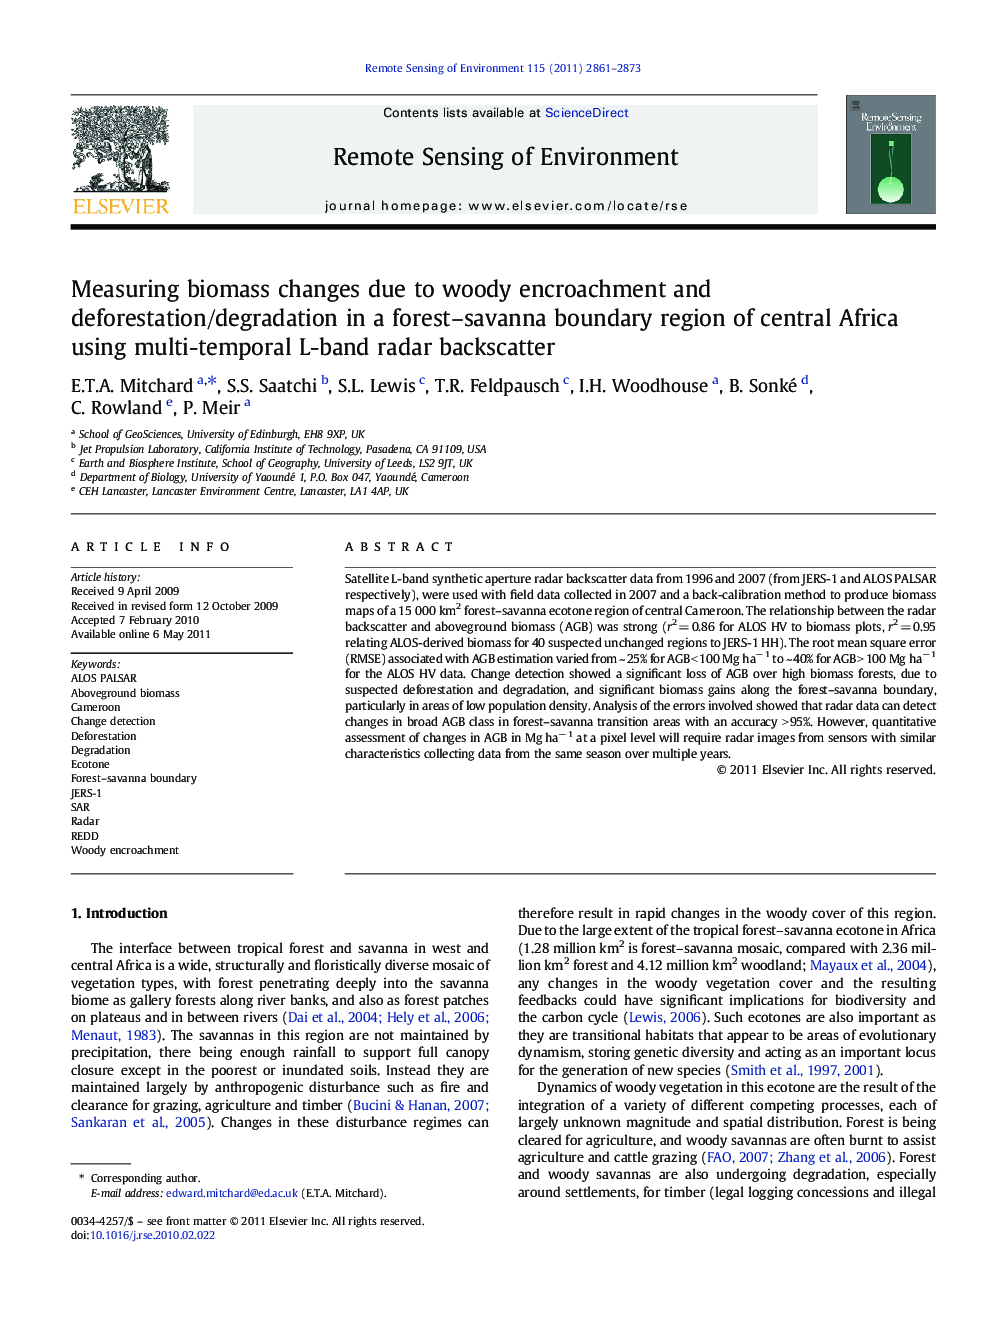 Measuring biomass changes due to woody encroachment and deforestation/degradation in a forest–savanna boundary region of central Africa using multi-temporal L-band radar backscatter